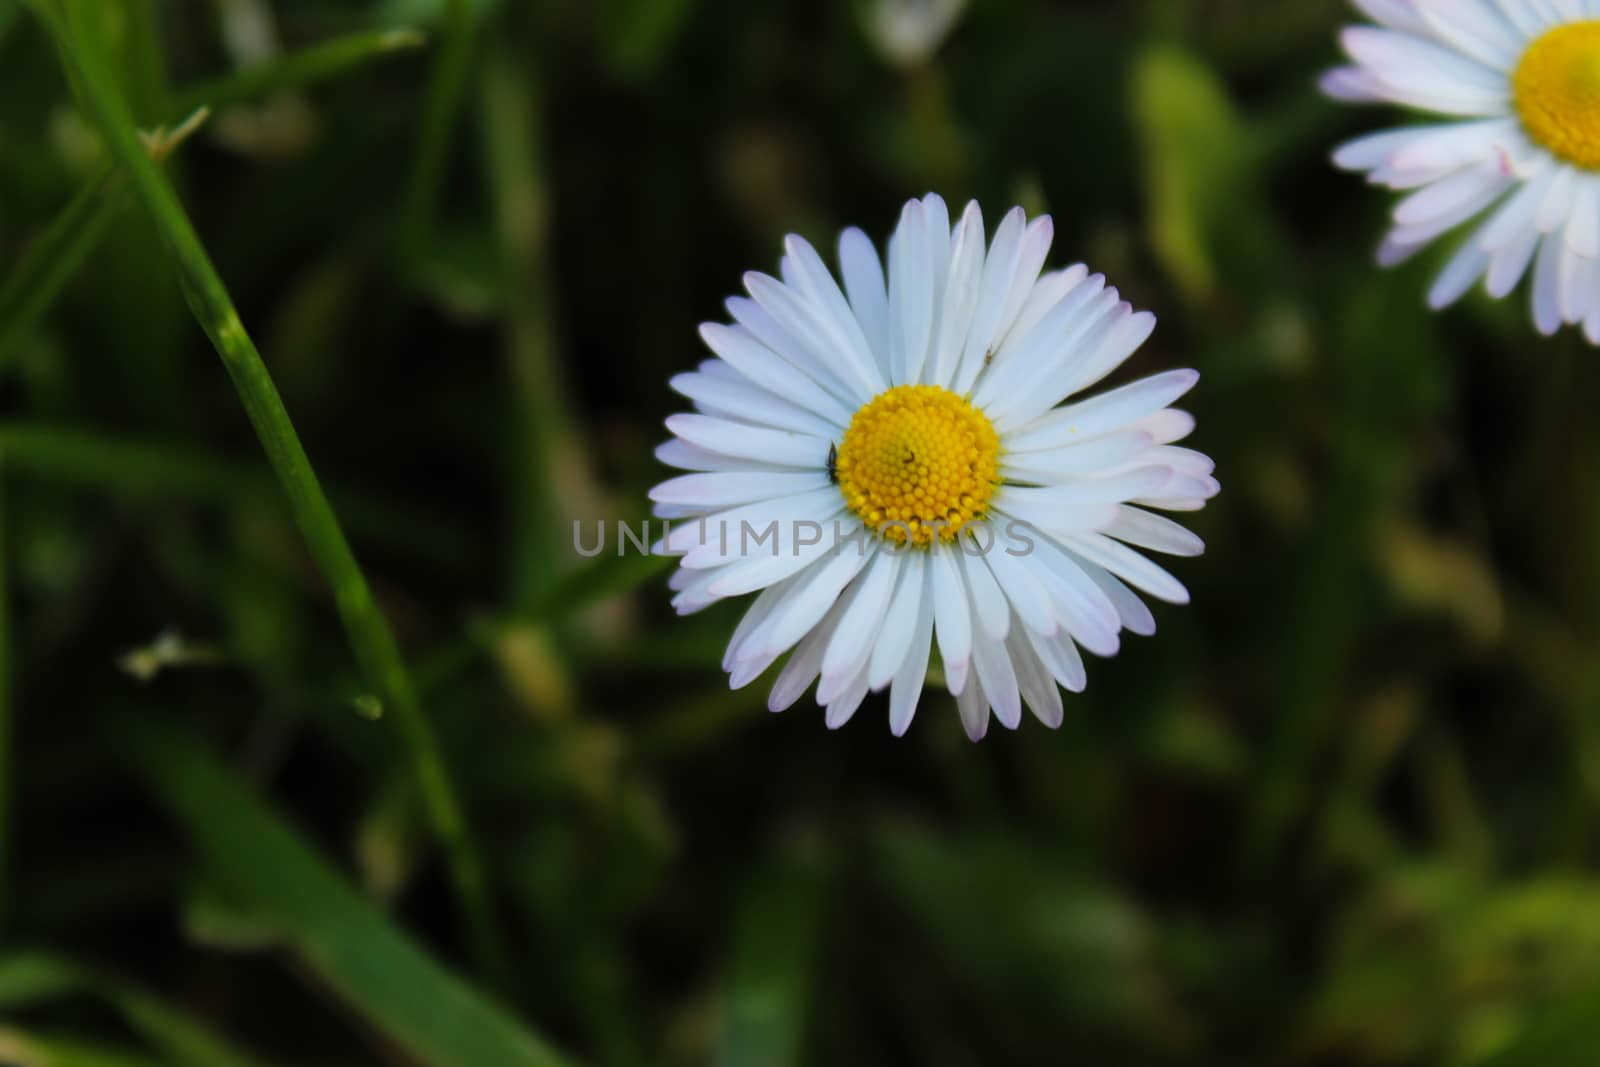 Bellis perenis, detailed white and yellow daisy flower in a green background. by mahirrov